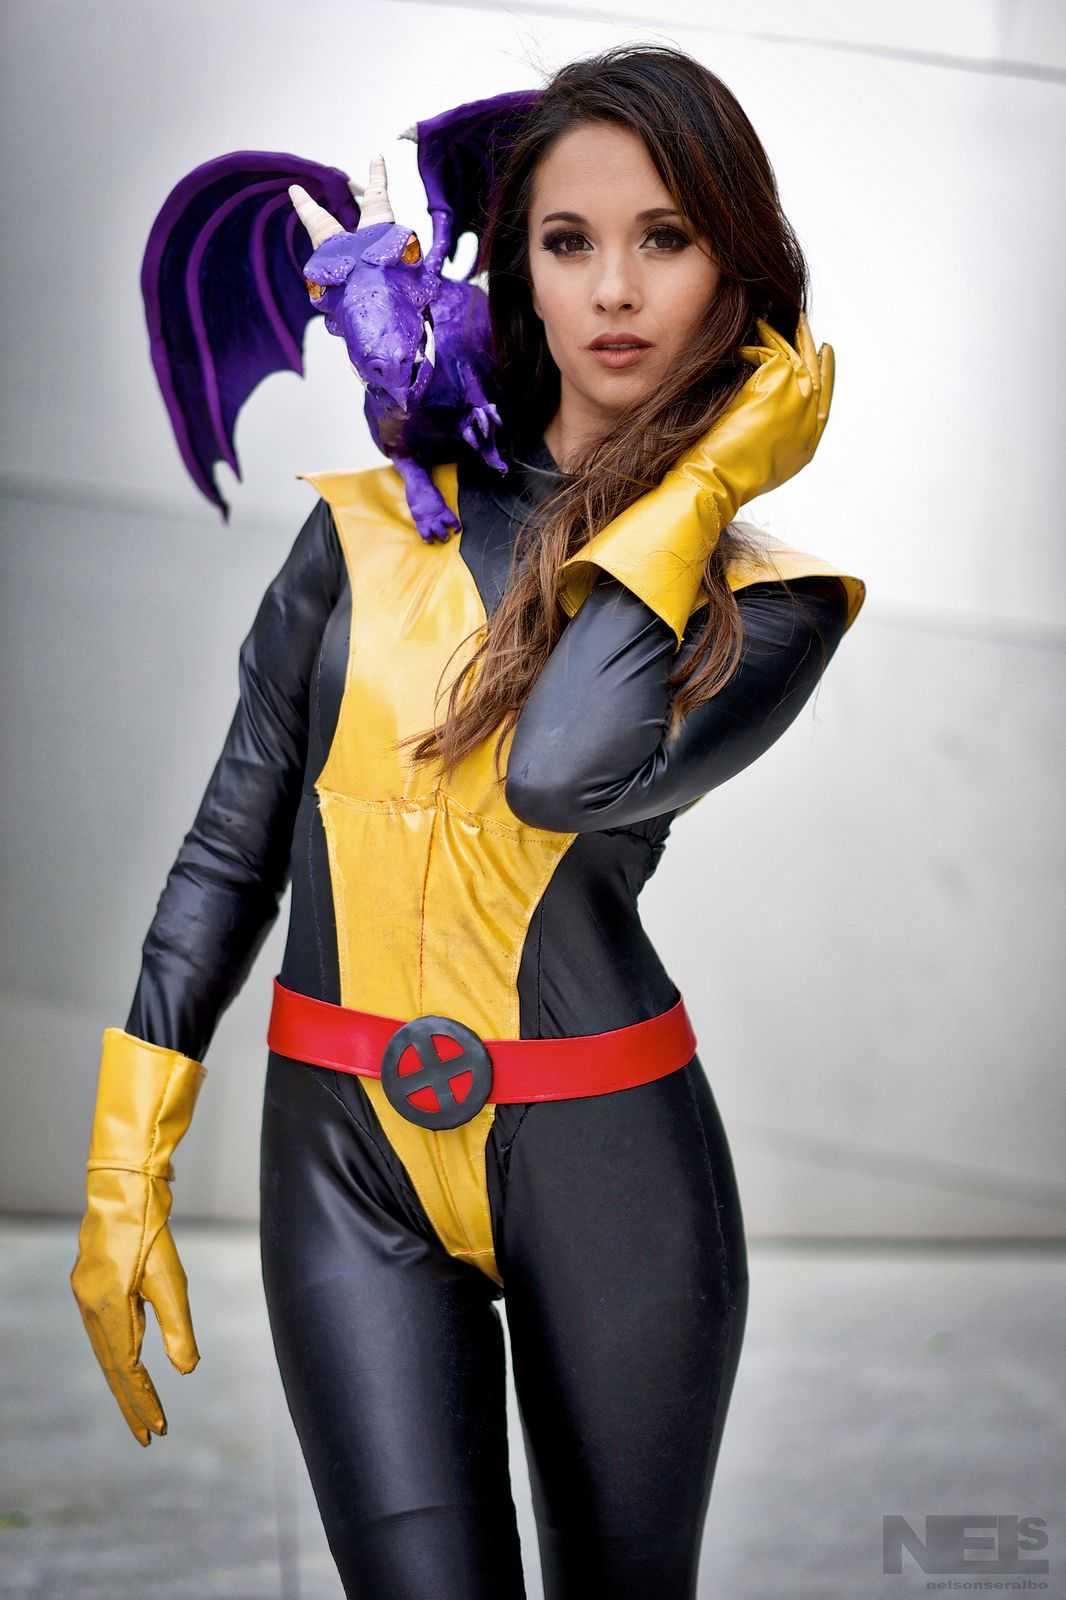 51 Hot Pictures Of Kitty Pryde That Will Make Your Heart Pound For Her 9